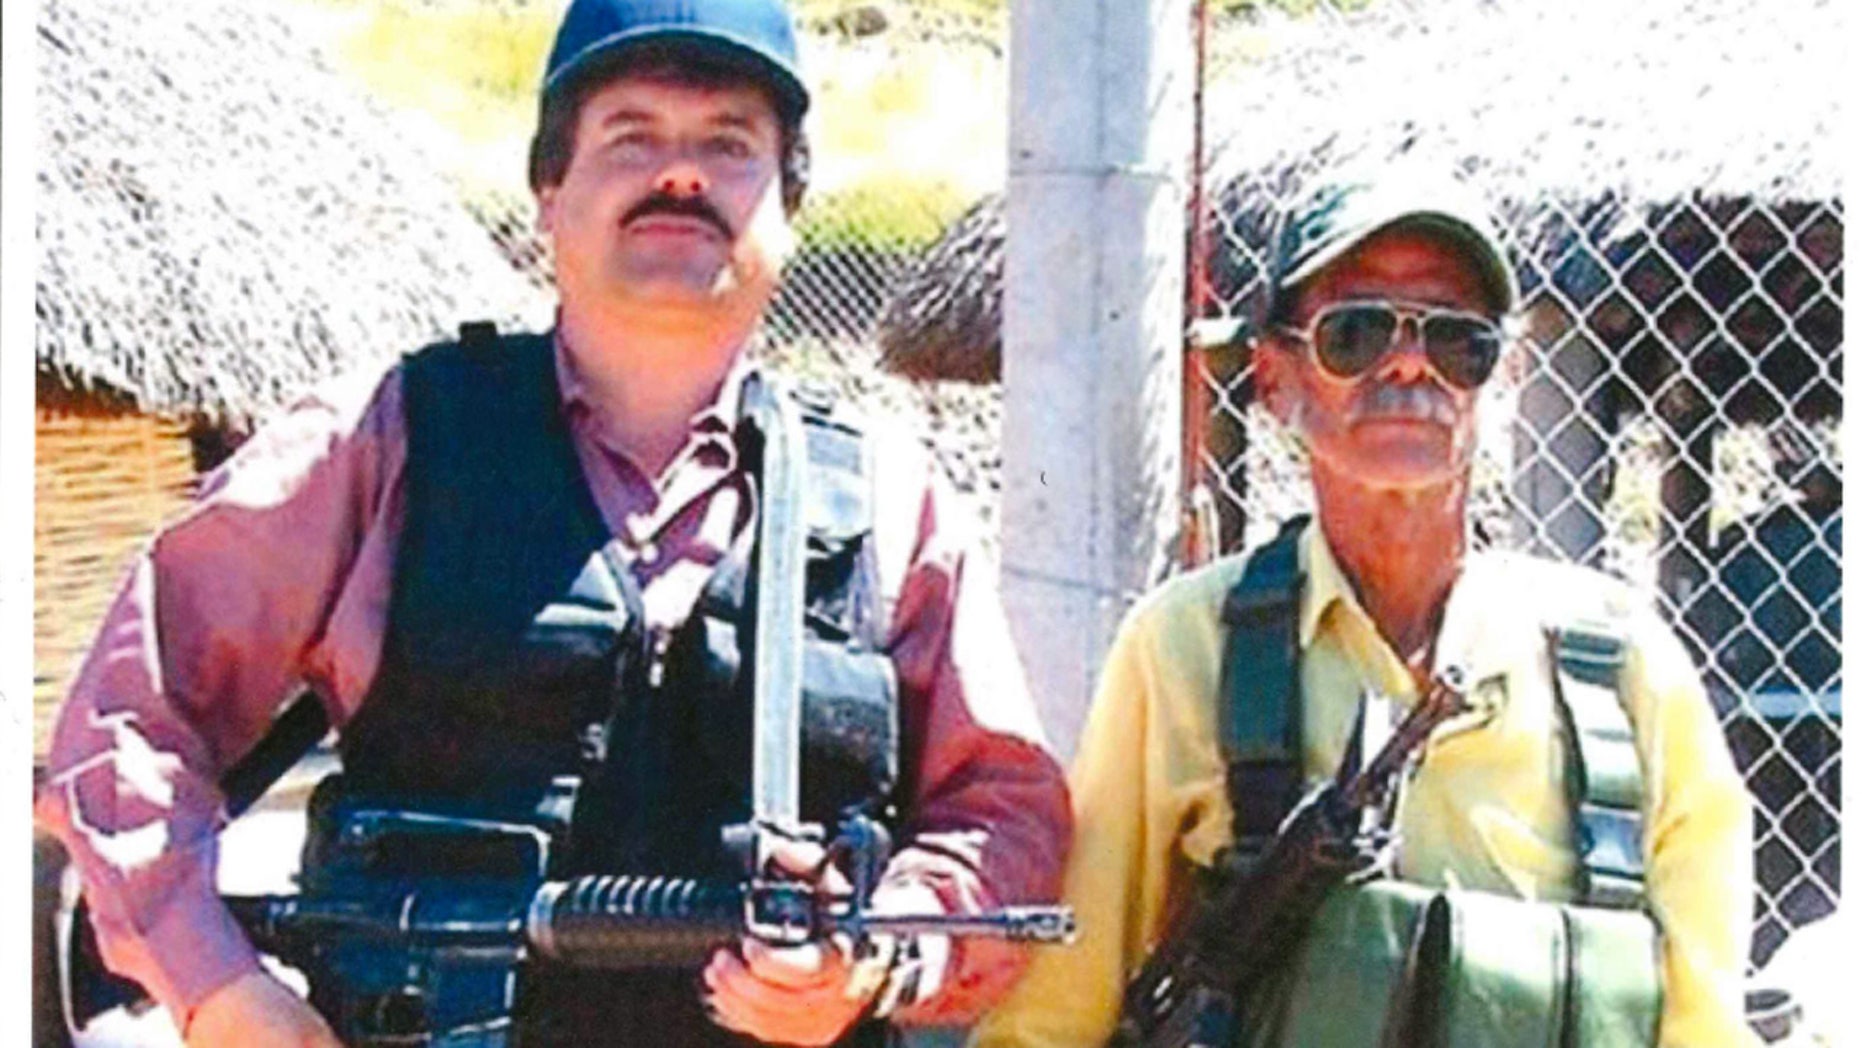 Funny: Audio of 'El Chapo' telling underlings how to deal with poLICE: "Don't beat them anymore" ElChapomachinegun